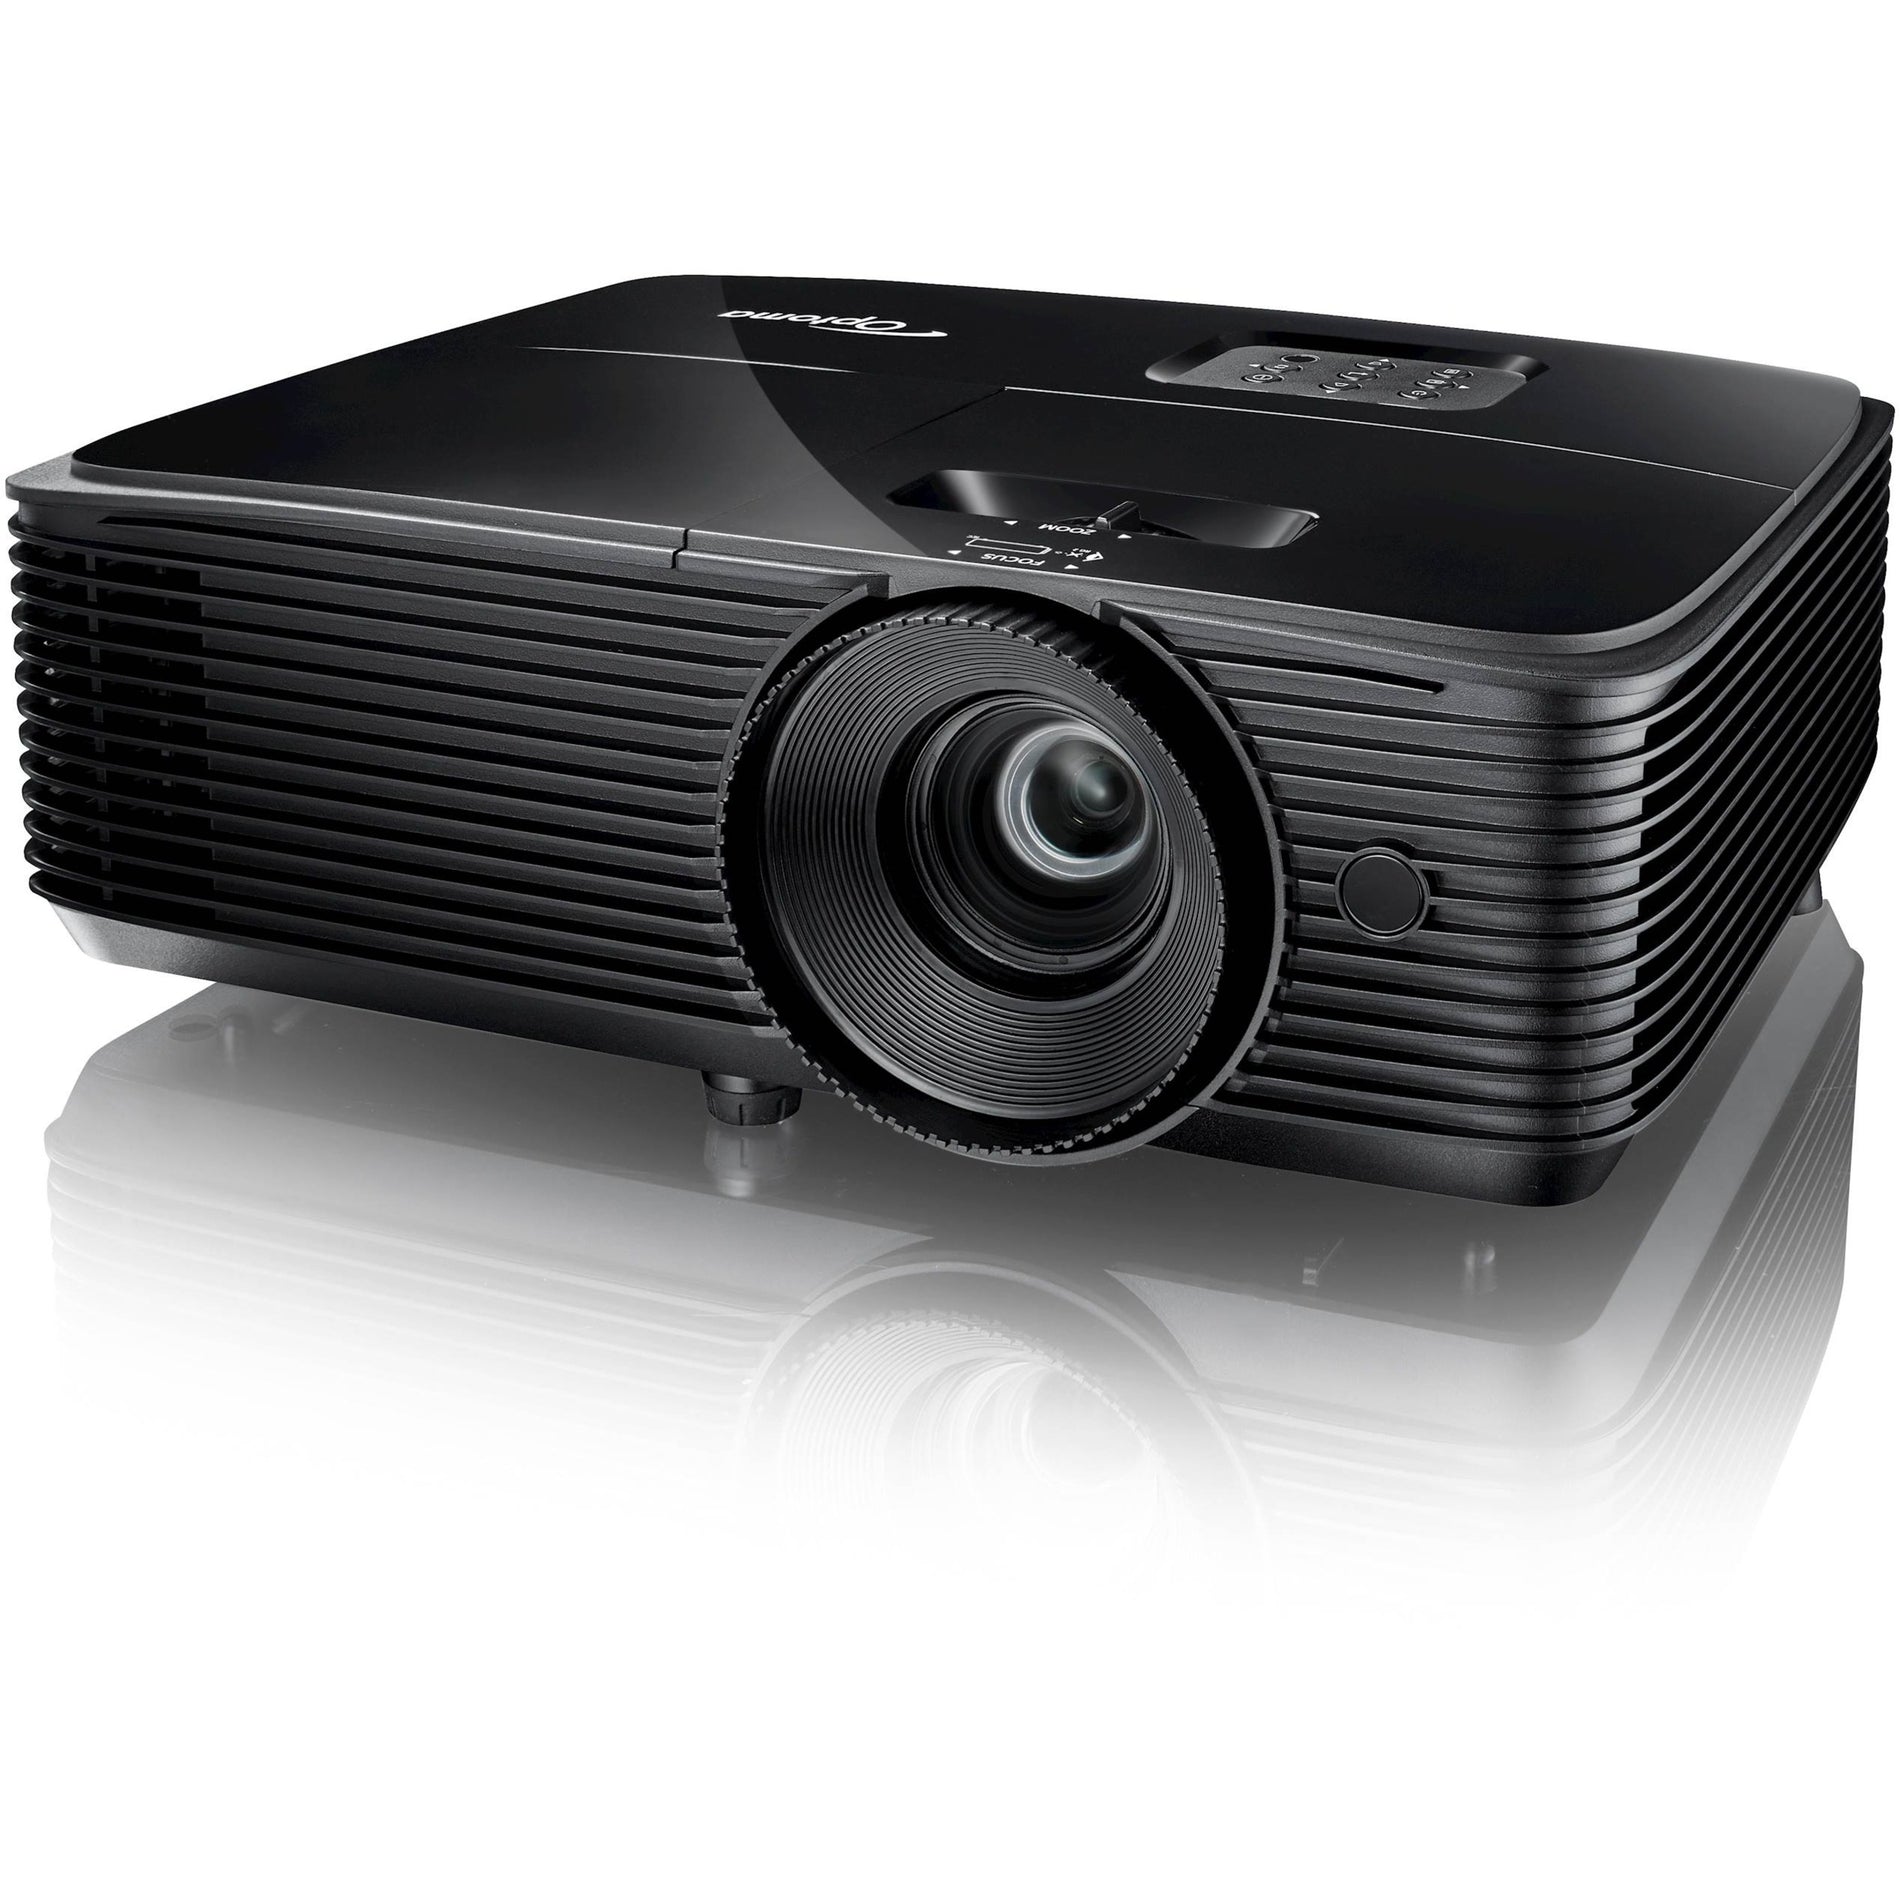 Optoma DH351 DLP Projector, Full HD, 3600 lm, 22,000:1 Contrast Ratio